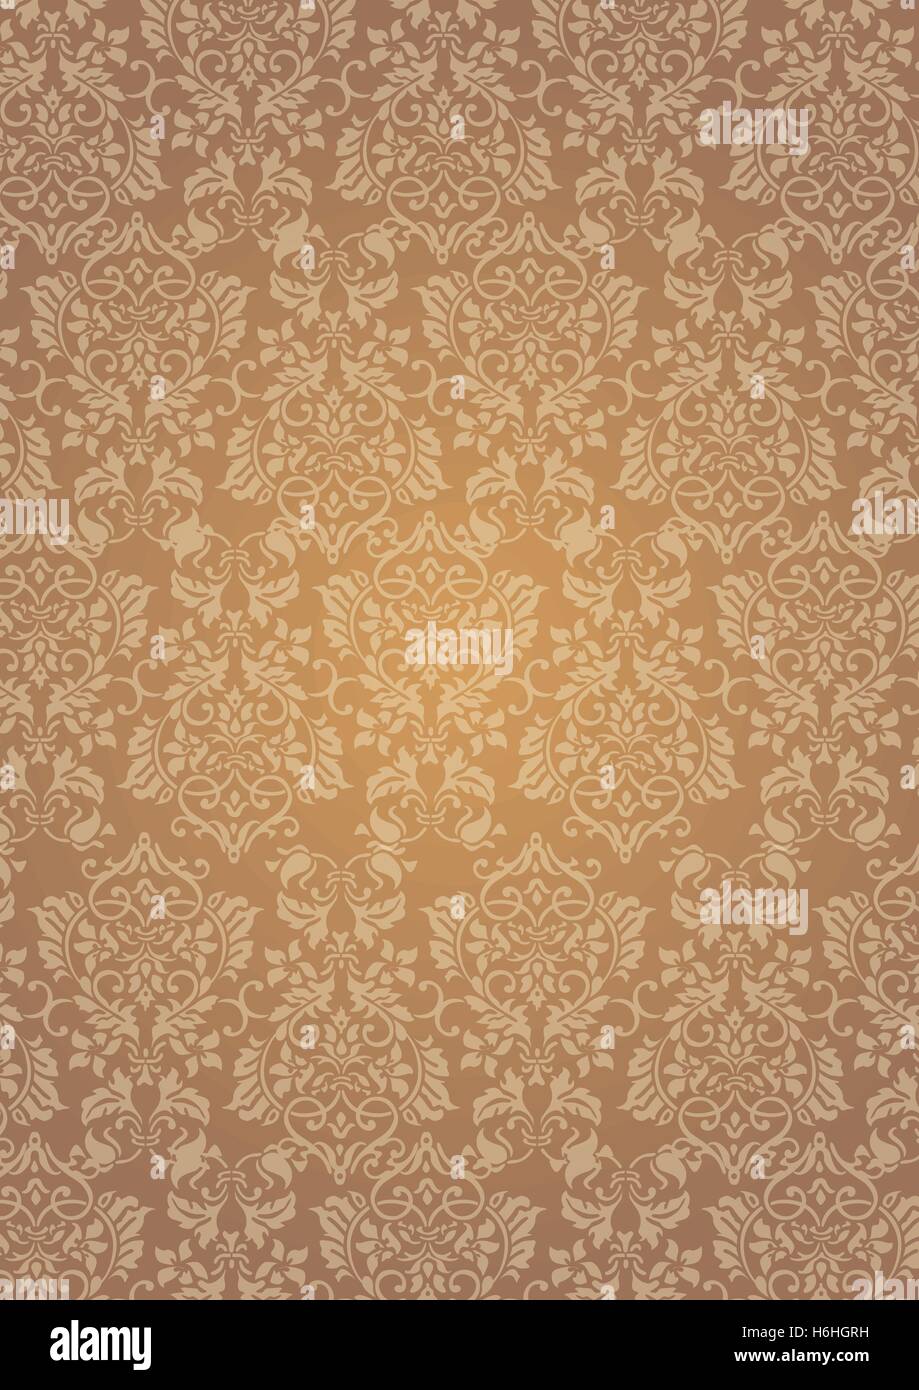 A4 size elegant brown flowers pattern textured wallpaper background Stock Vector